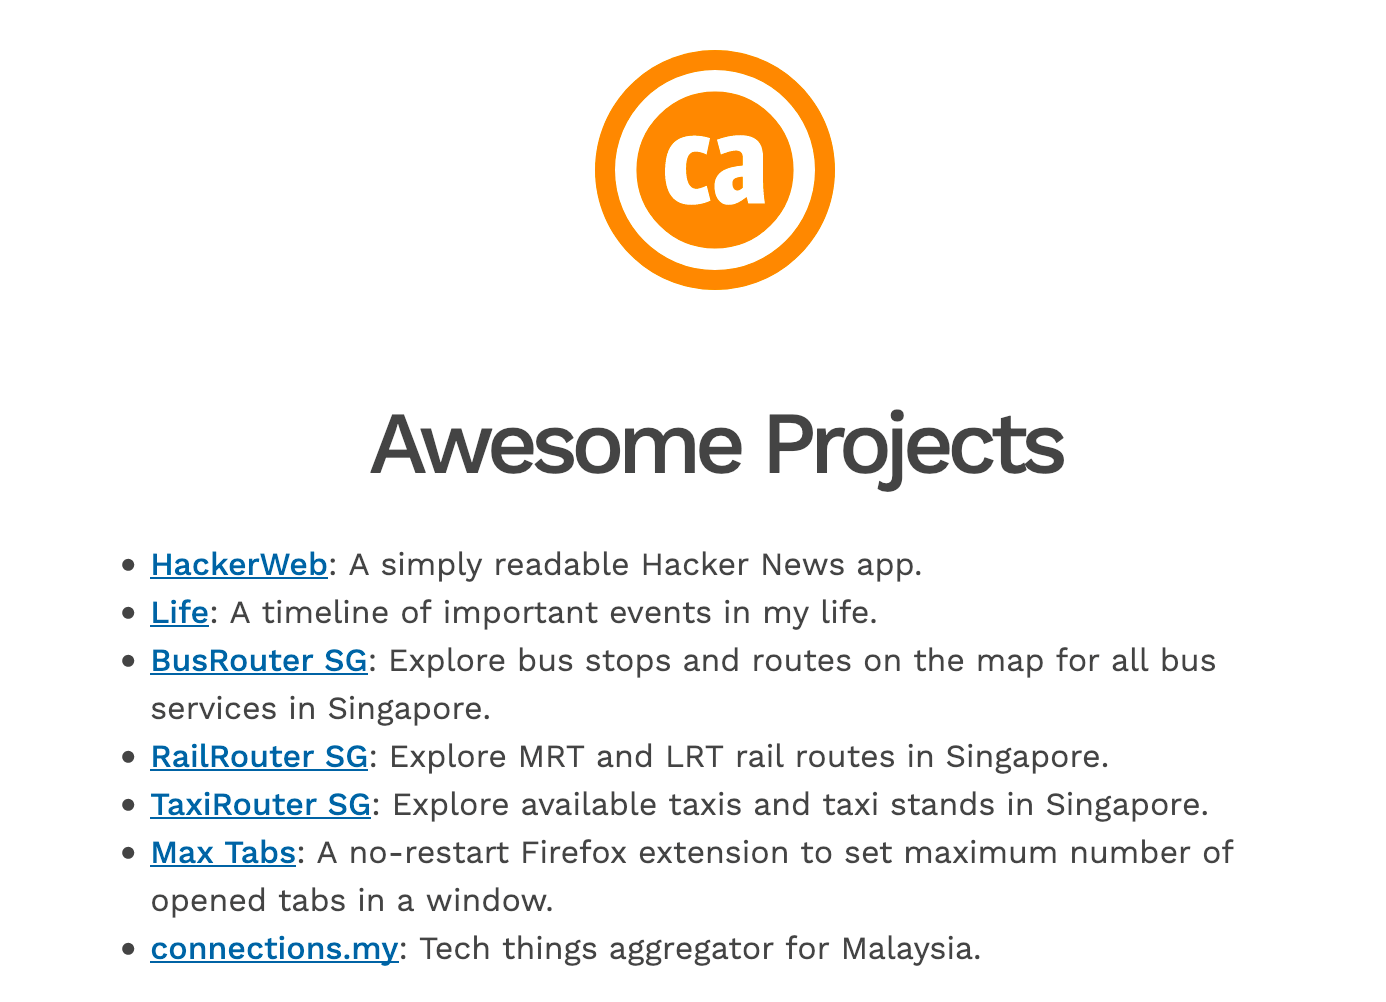 Chee Aun's projects